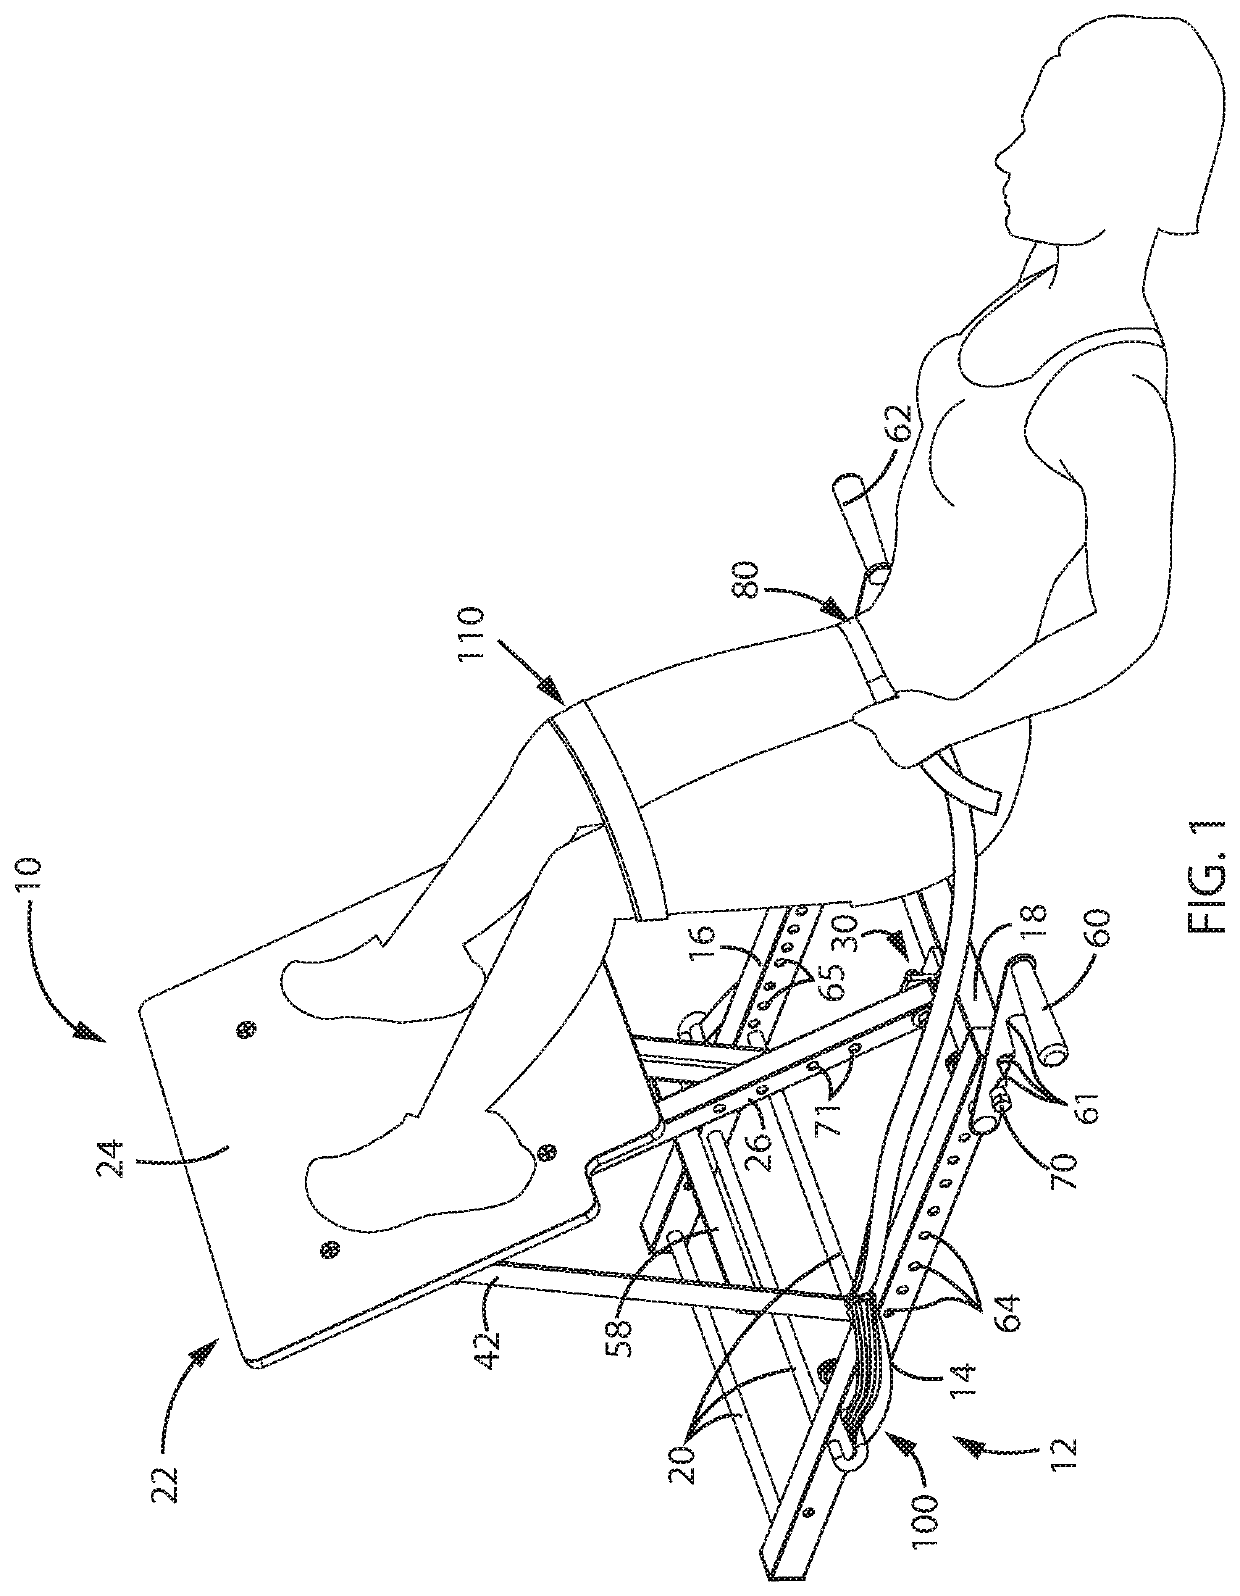 Fitness training equipment and method of use